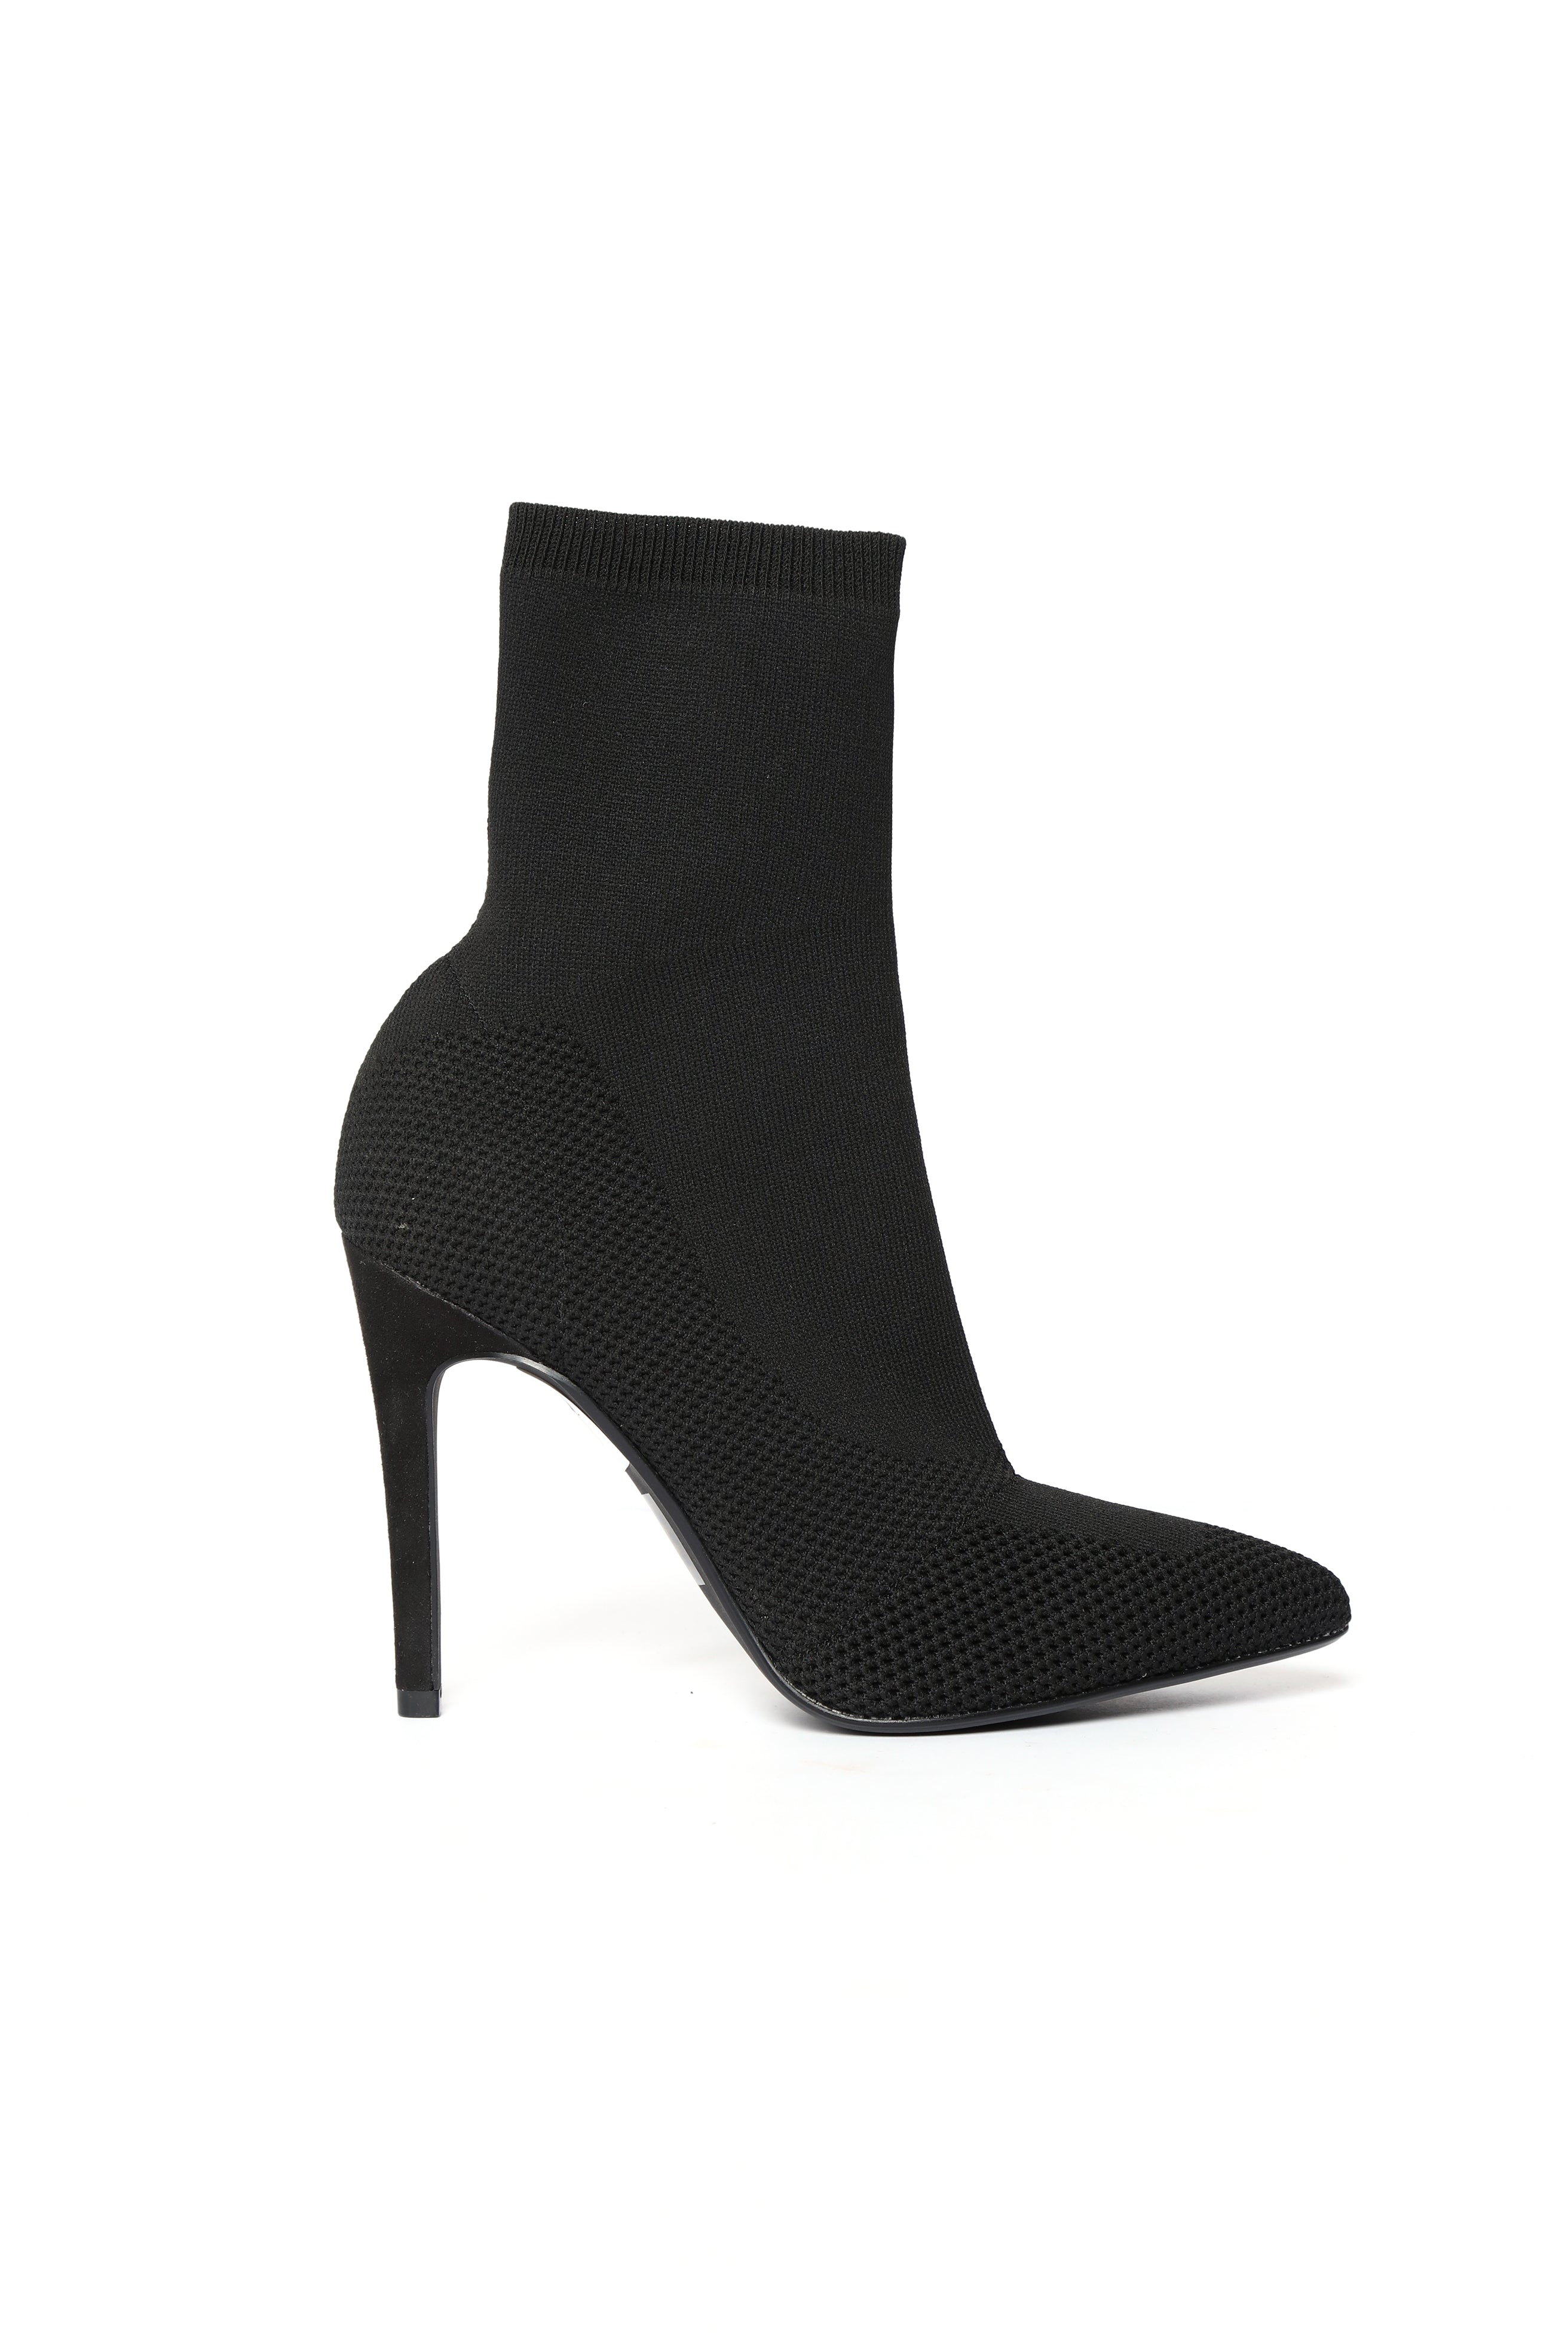 I'm In Knit Heeled Booties - Black